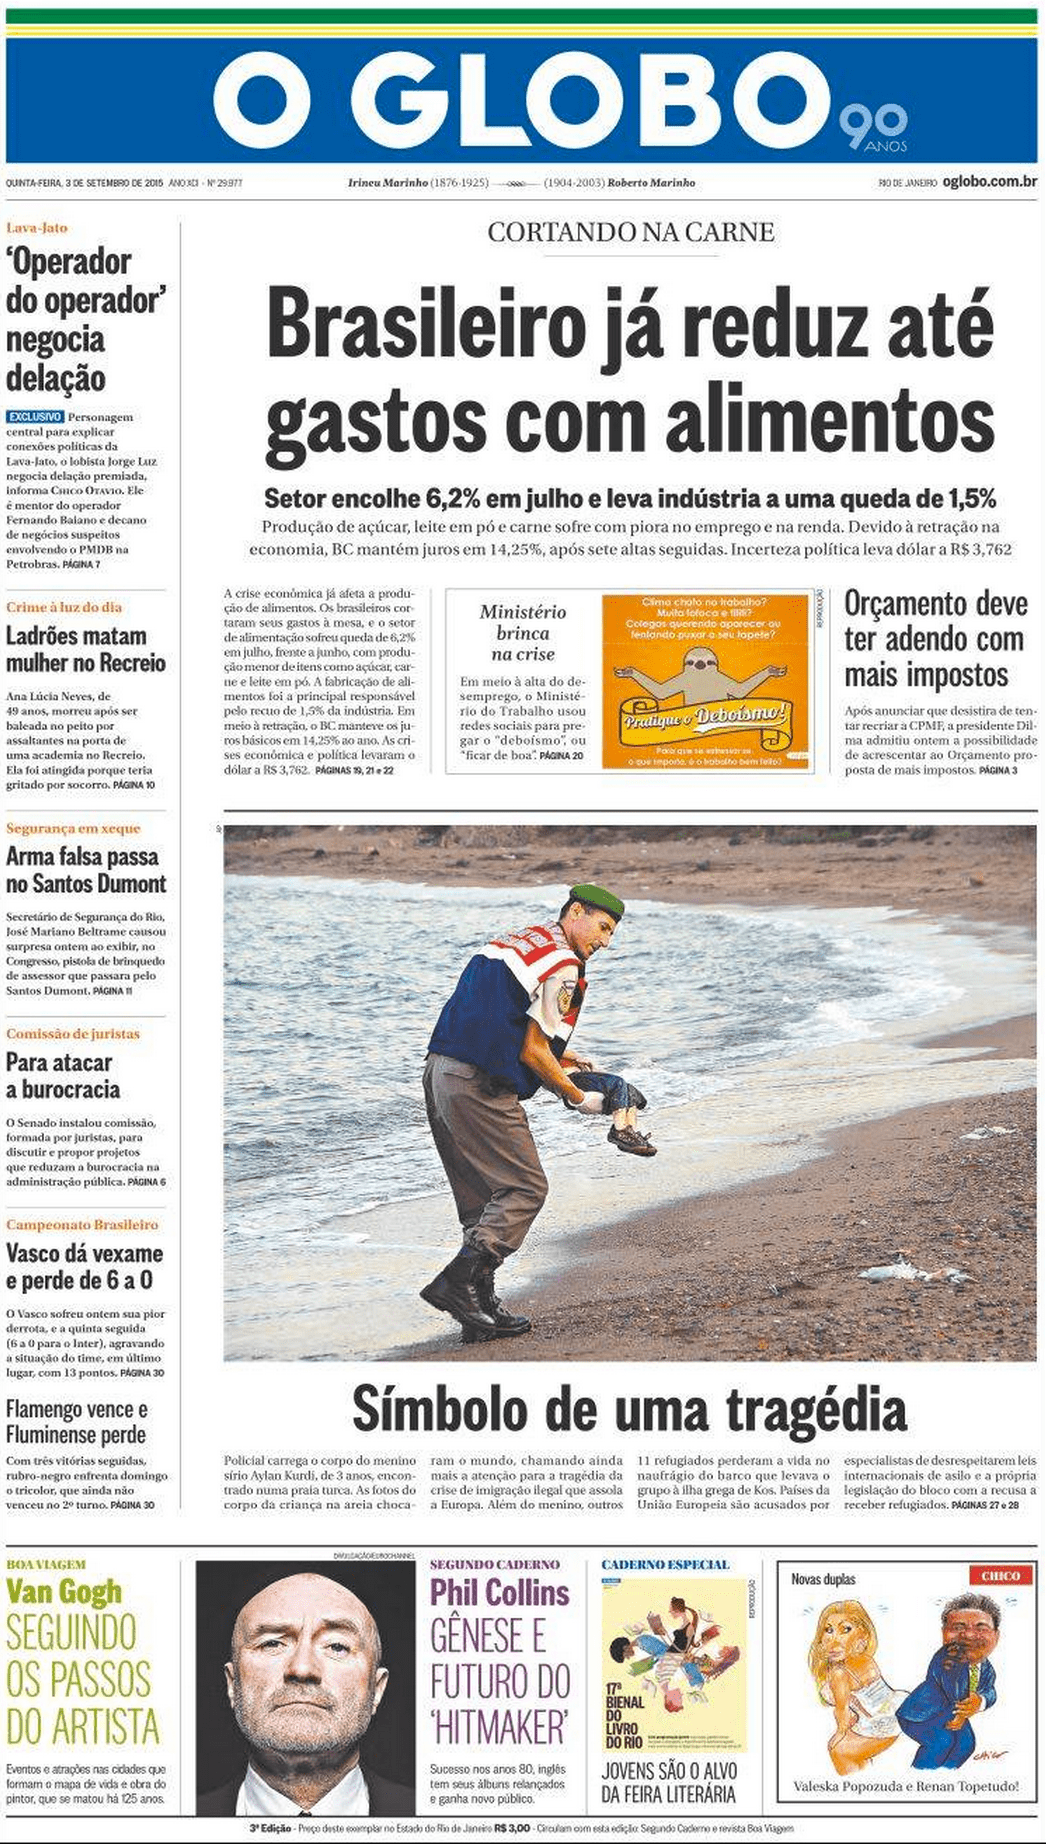 Drowned Migrant Boy O Globo Front Page